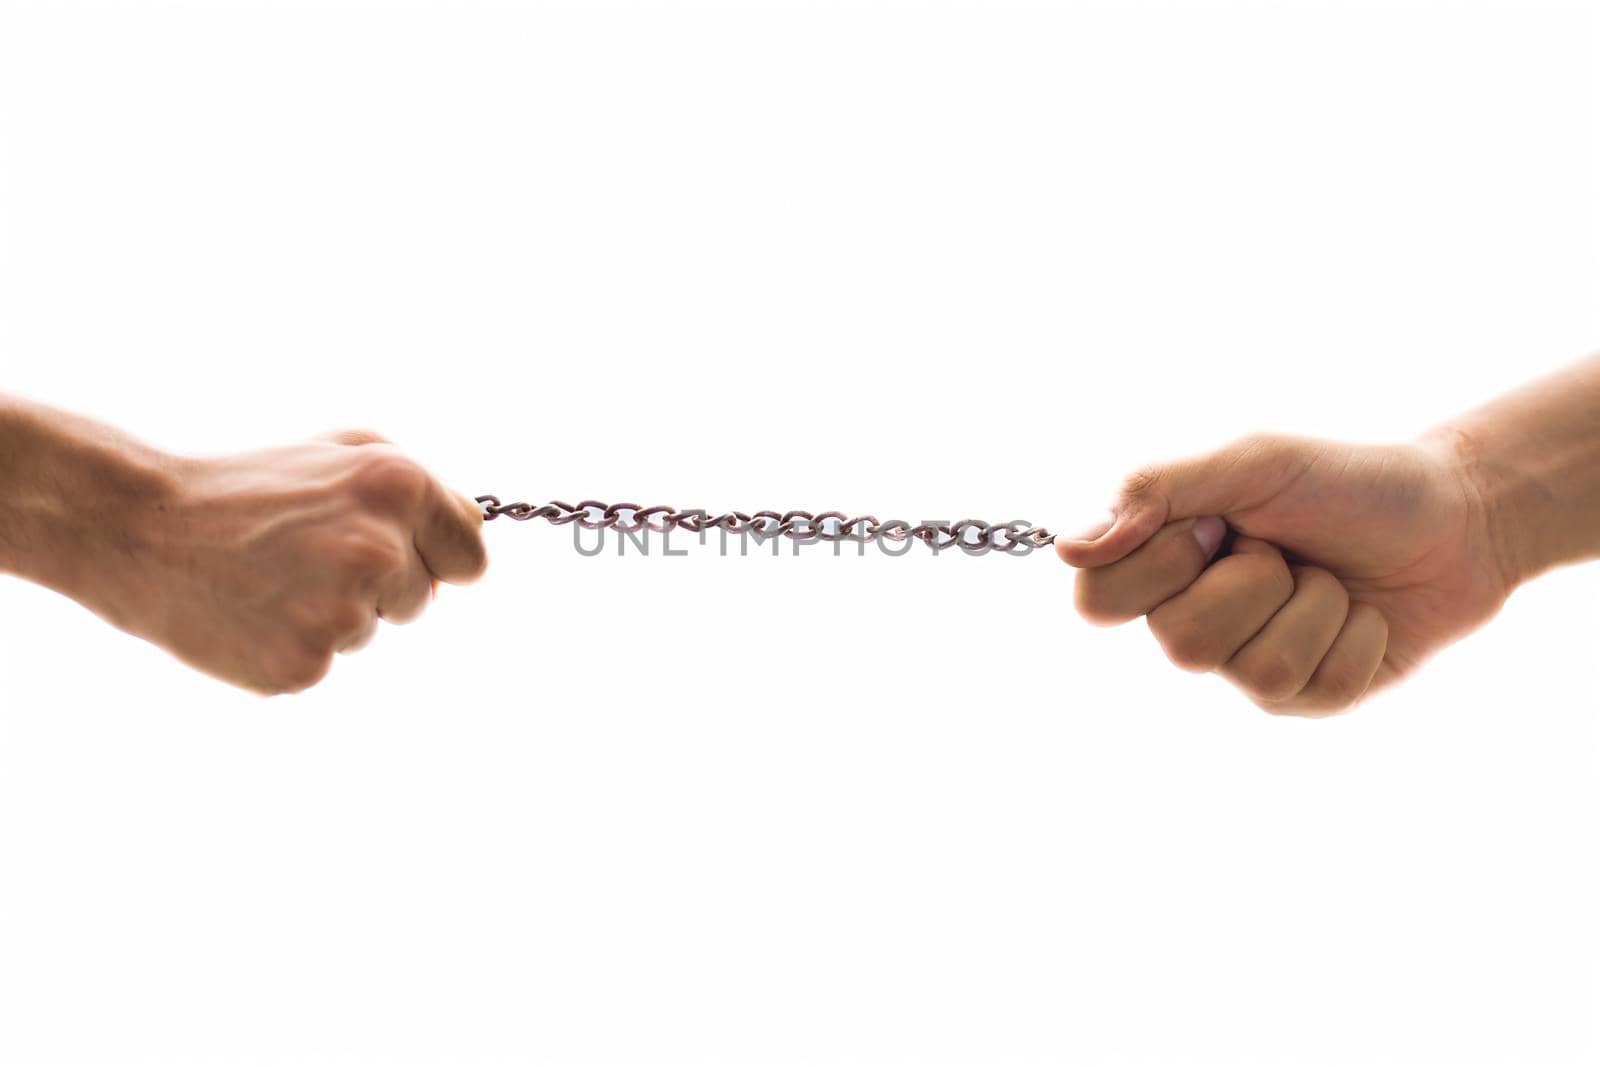 Close up shot of two hands fighting for the piece of chain or playing tug of war game. Concept of making a place in the fields, & competition. Isolated on white.